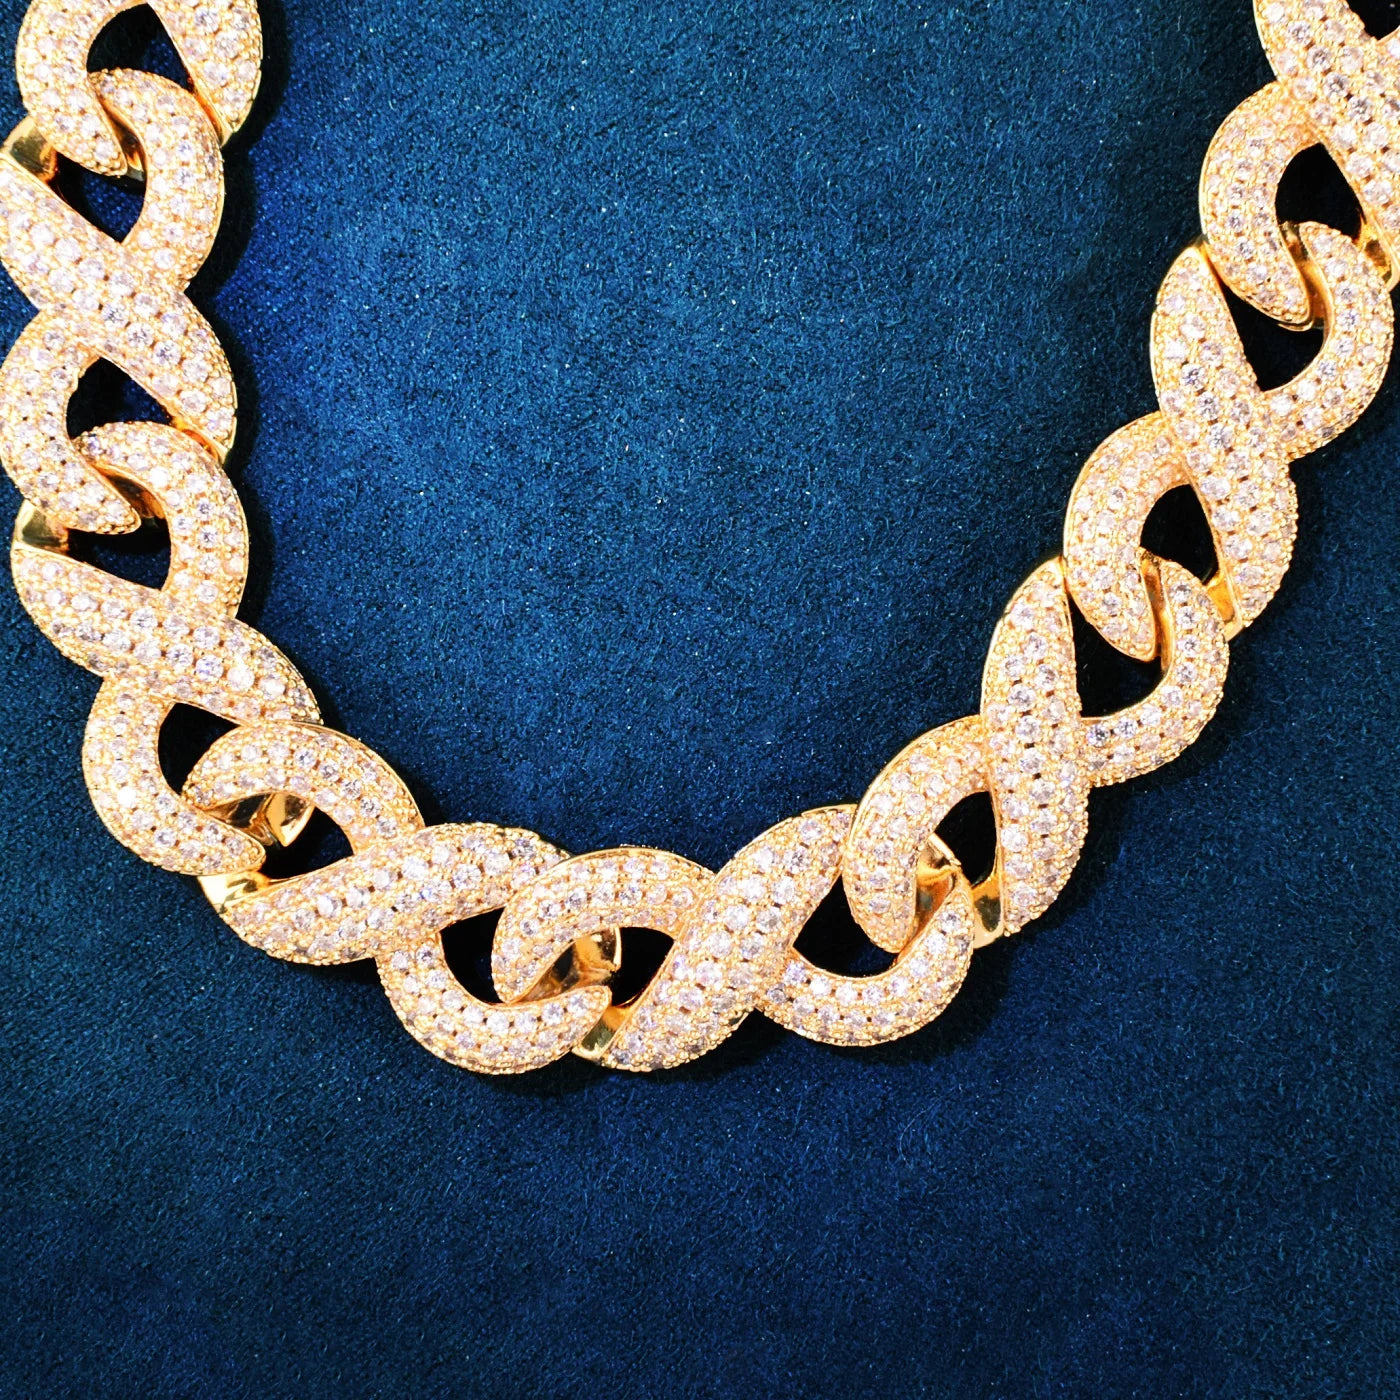 INFINITY CUBAN LINK CHAIN NECKLACE - 15MM